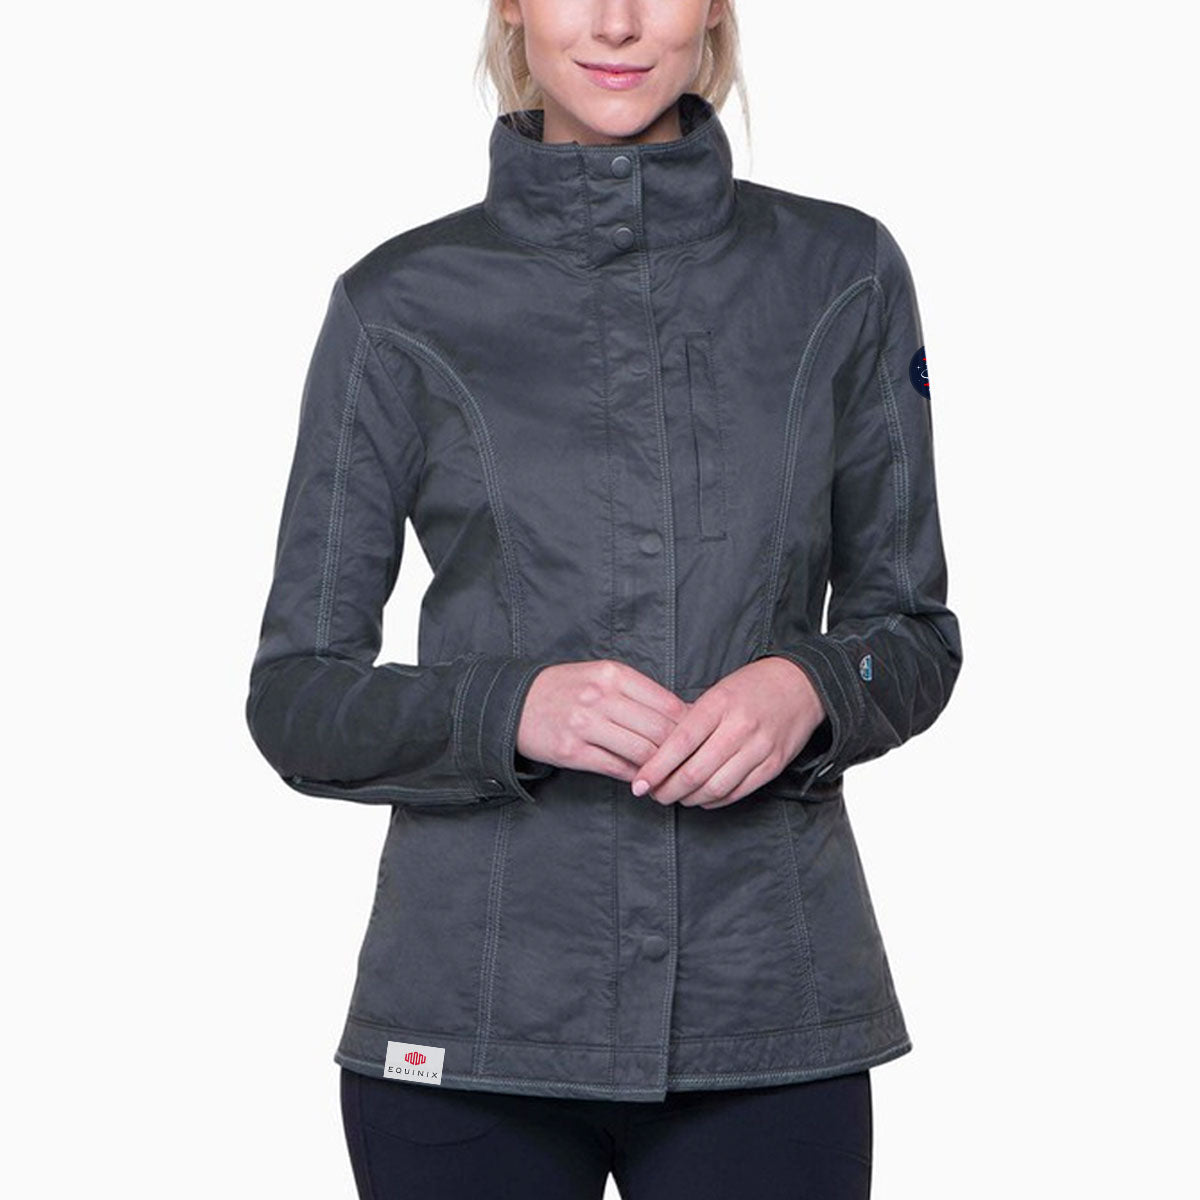 Project Gemini Jacket (Women's Fitted) – Equinix Metal